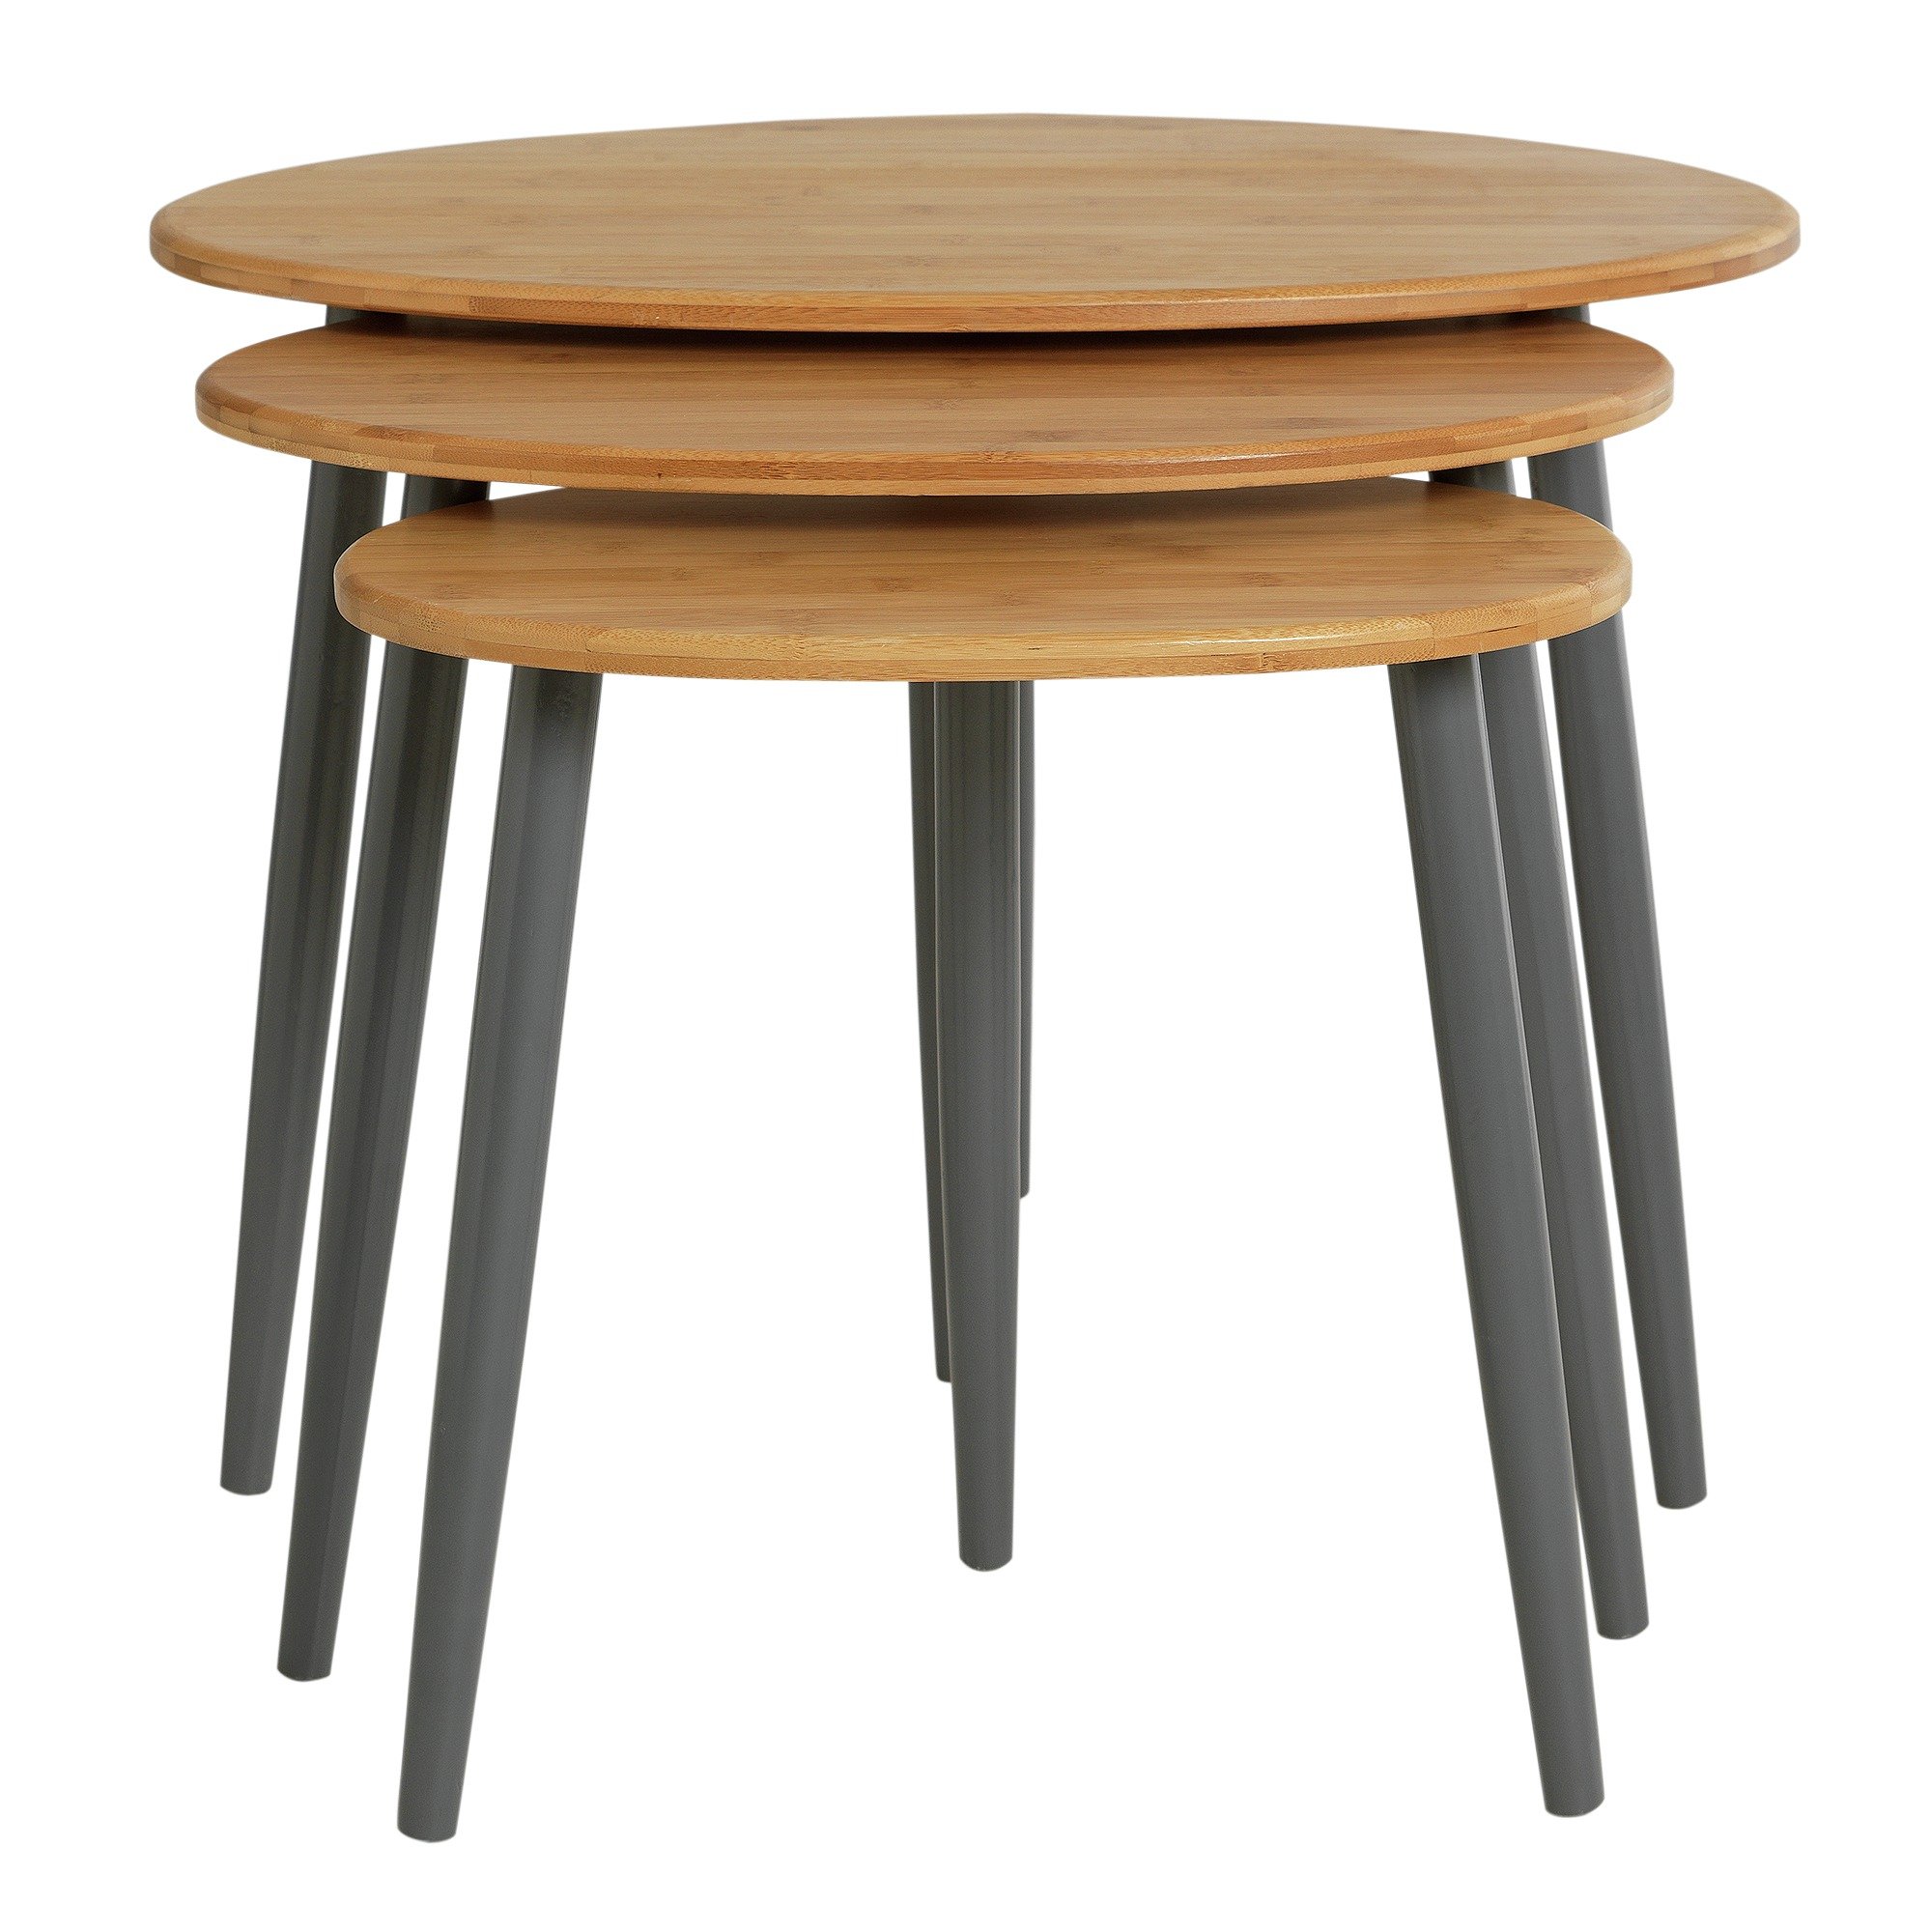 Argos Home Nest of 3 Tables - Bamboo